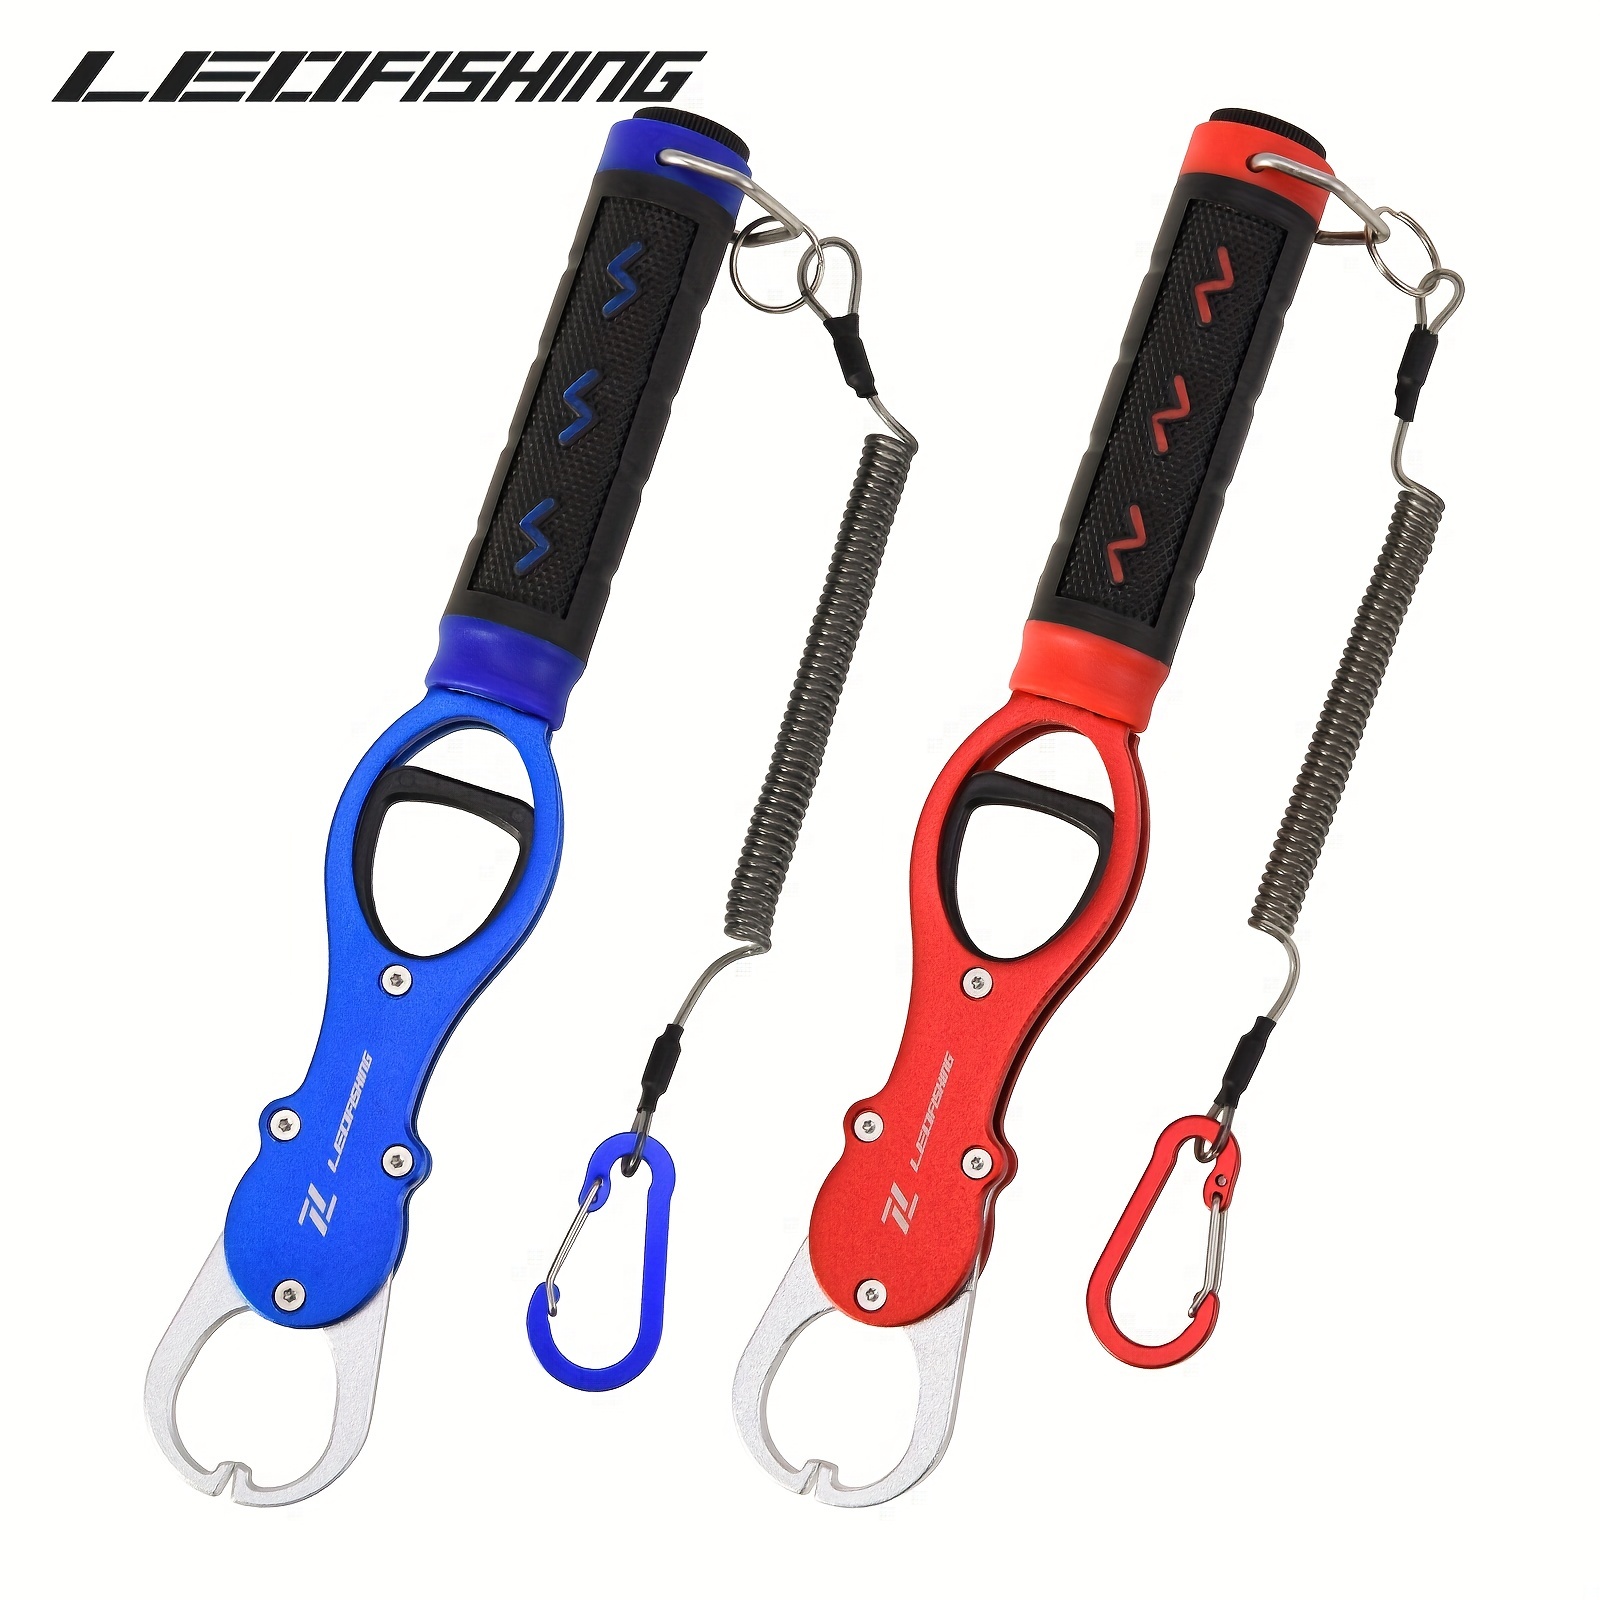 KastKing Fishing Pliers with Fish Lip Gripper, Saltwater Resistant Fishing  Tools, Fishing Gear with Rubber Handle, Lanyard